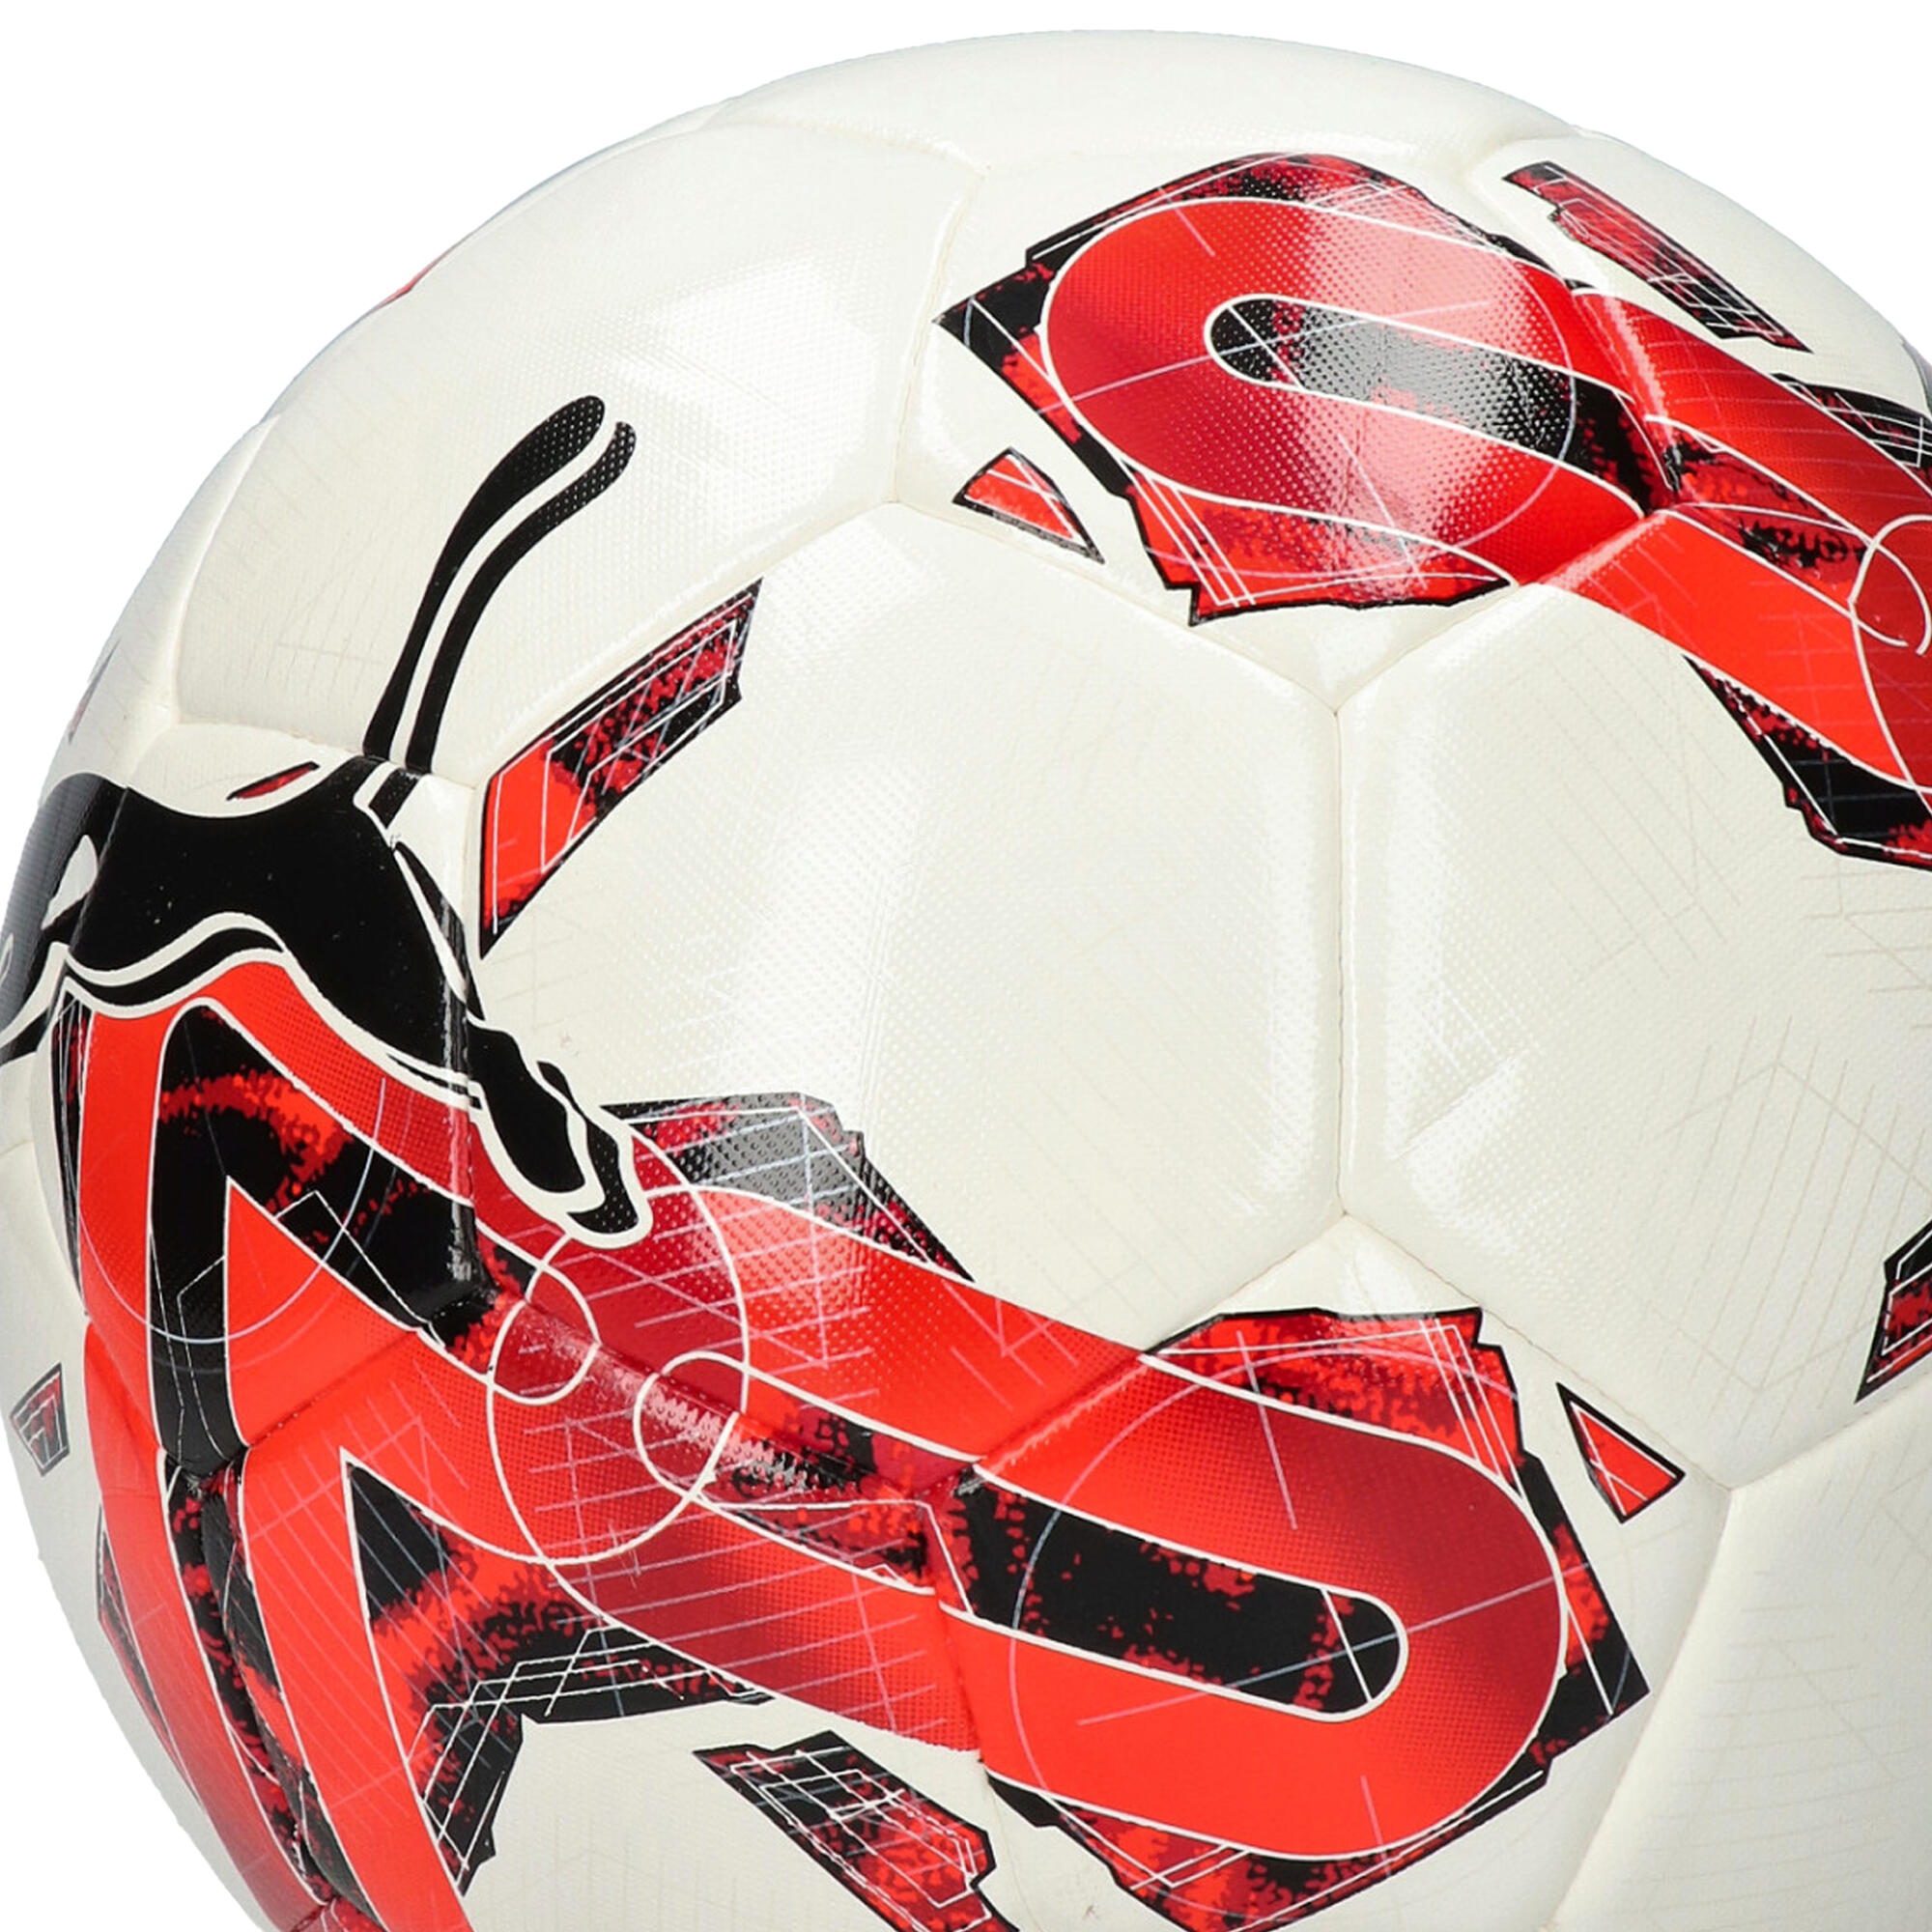 TeamFINAL6 MS Training Football (White/Red) 3/3